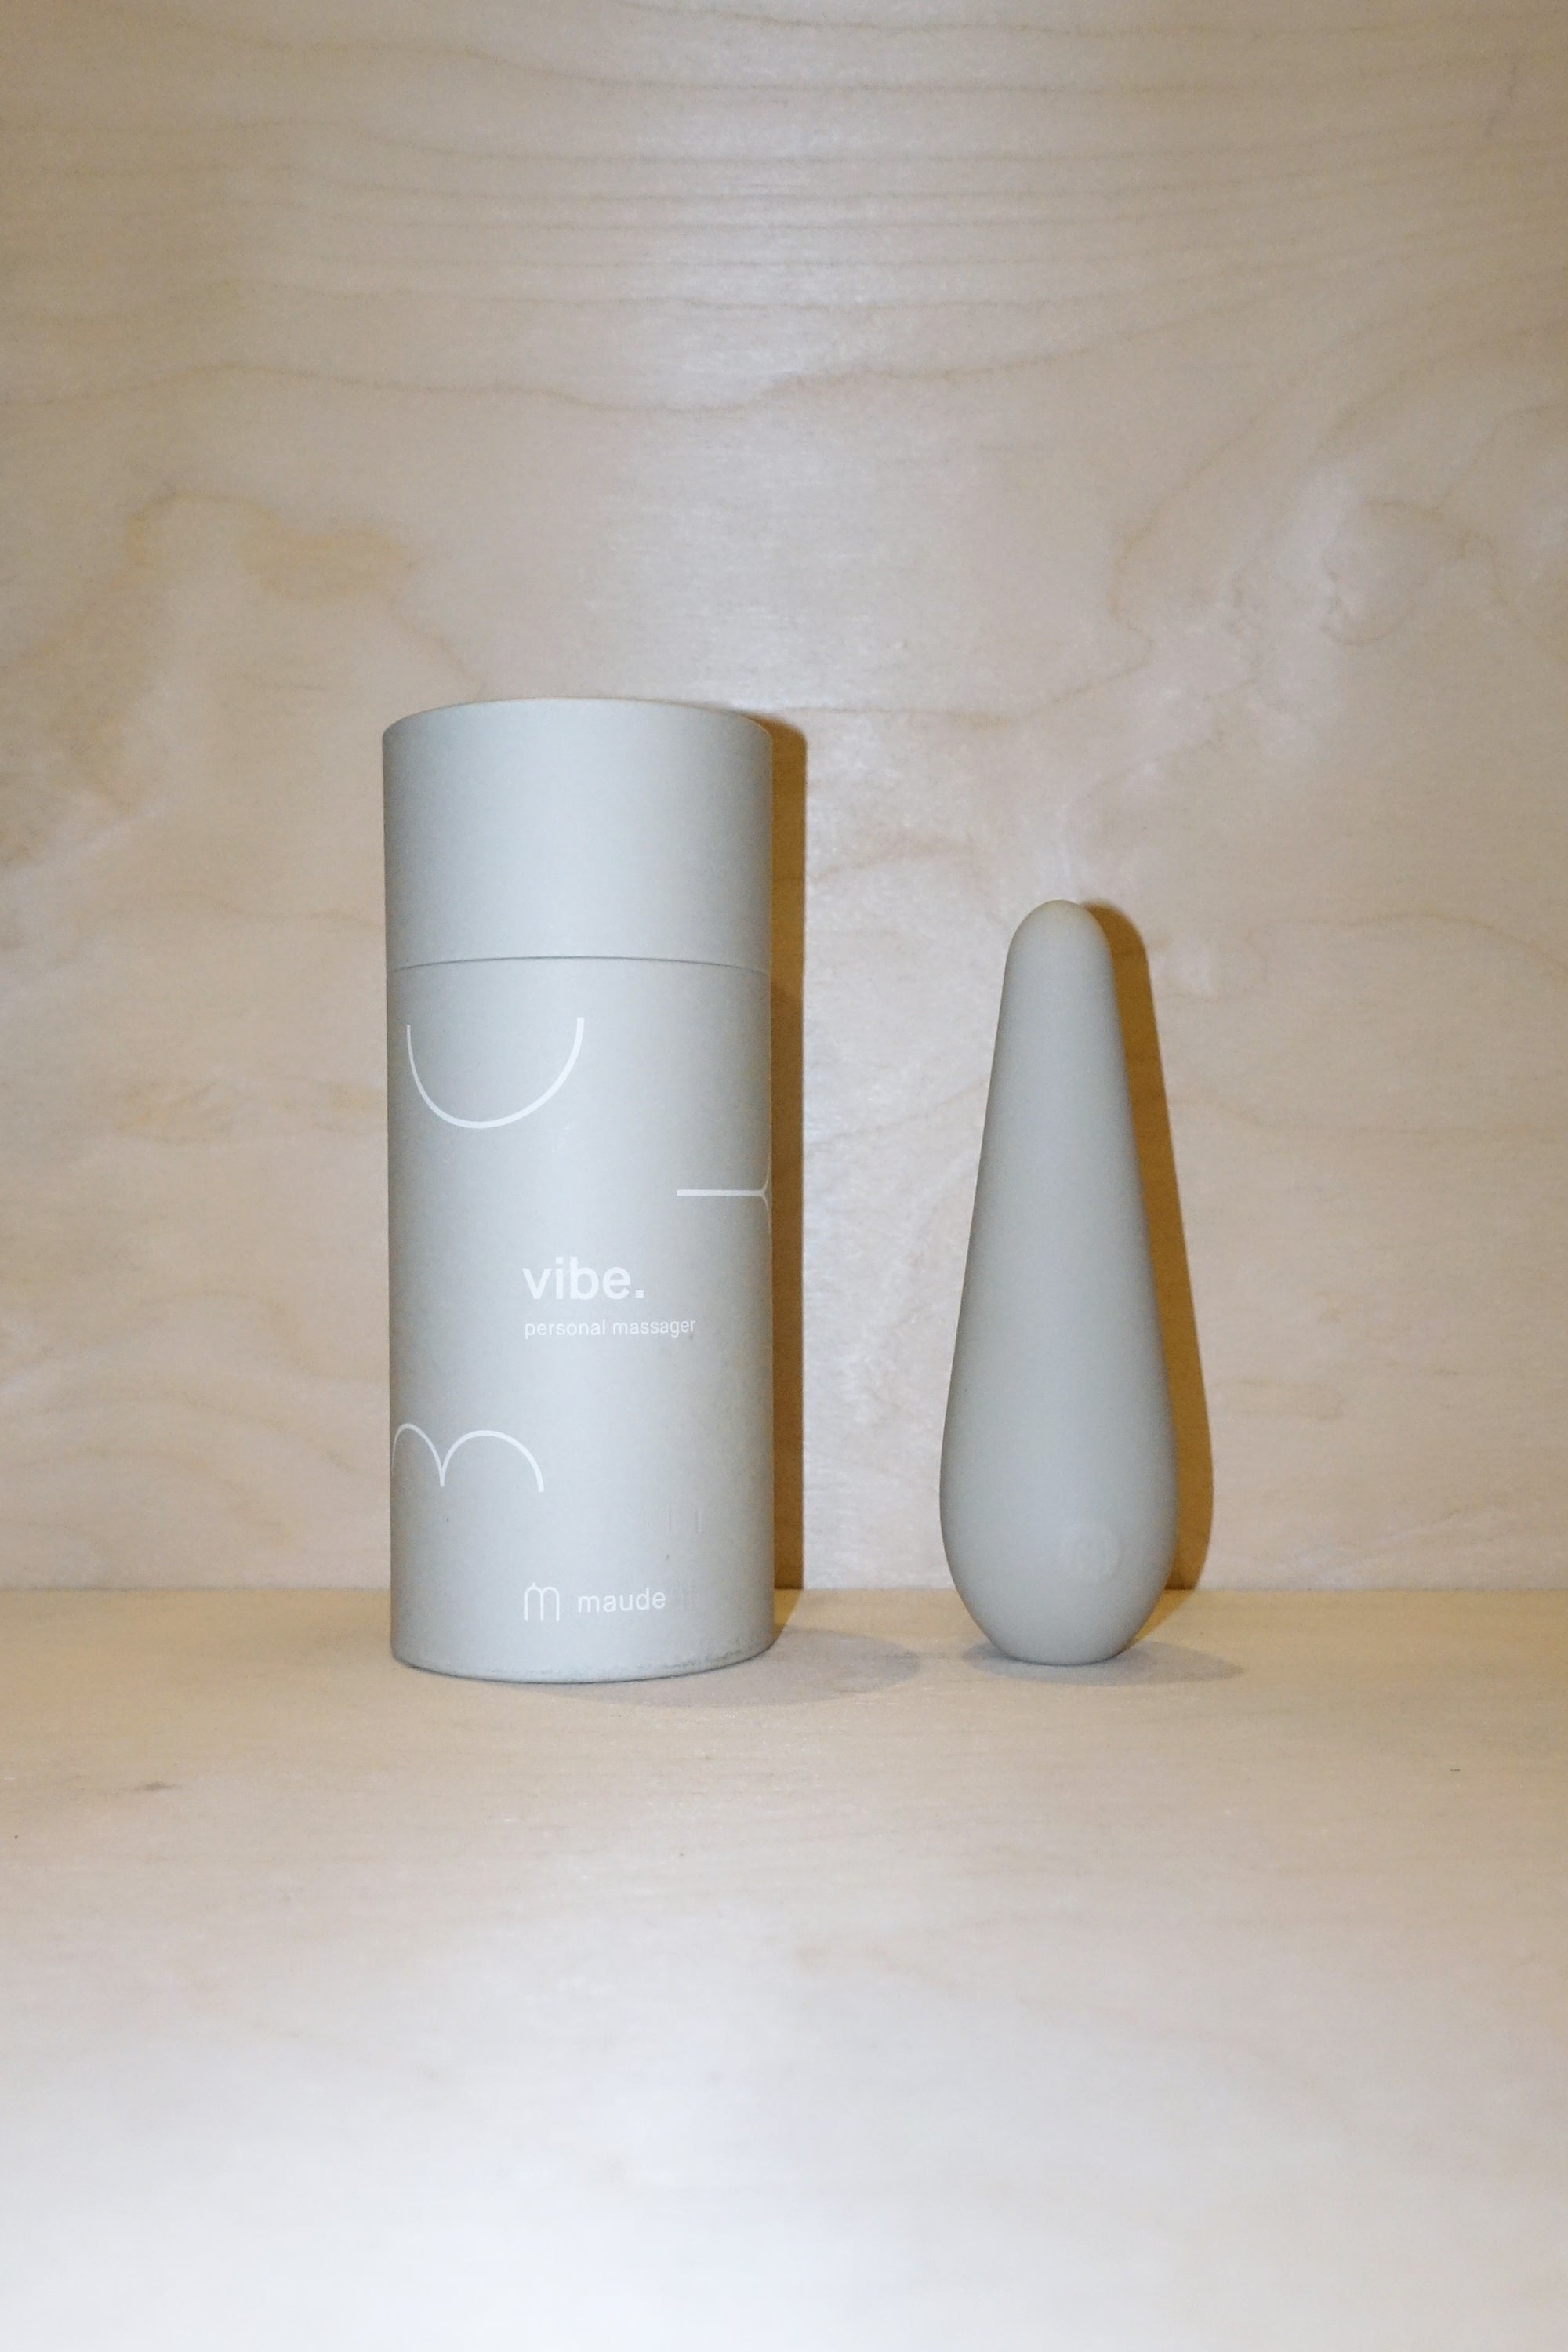 Vibe: Personal Massager by Maude